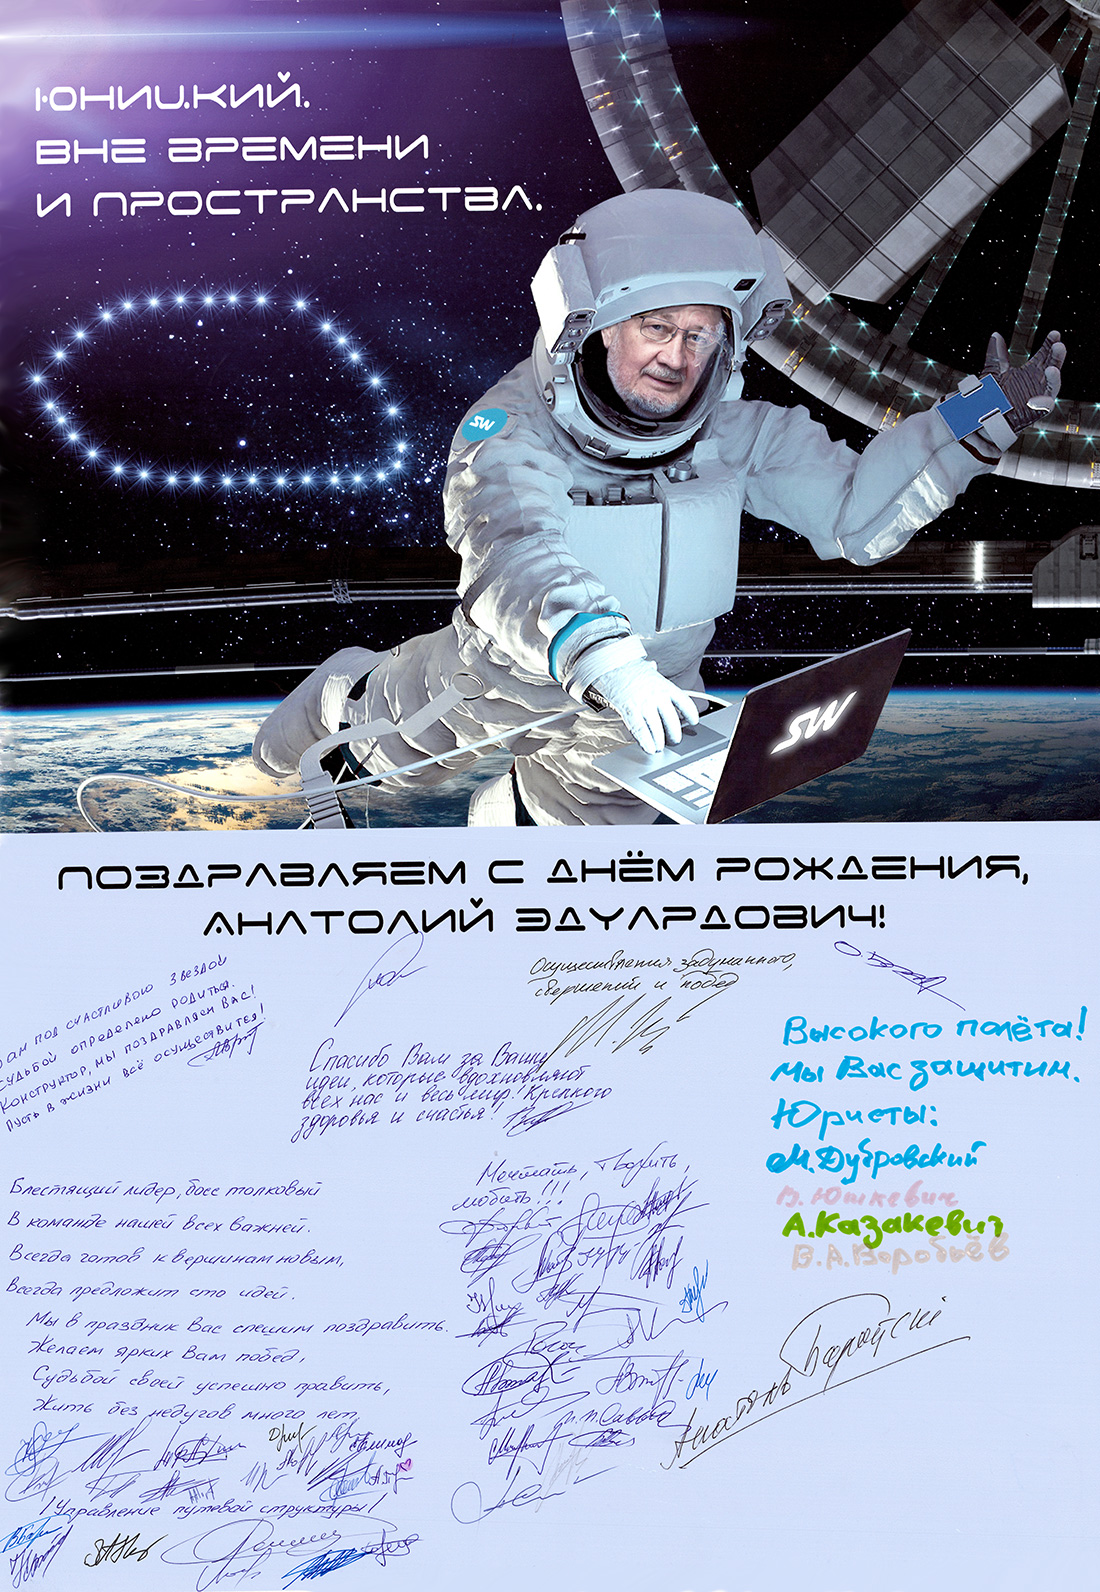 The staff of Skyway Technologies Co. congratulated General designer Anatoly Yunitskiy with a unique series of posters under the General title - Yunitskiy. Beyond time and space